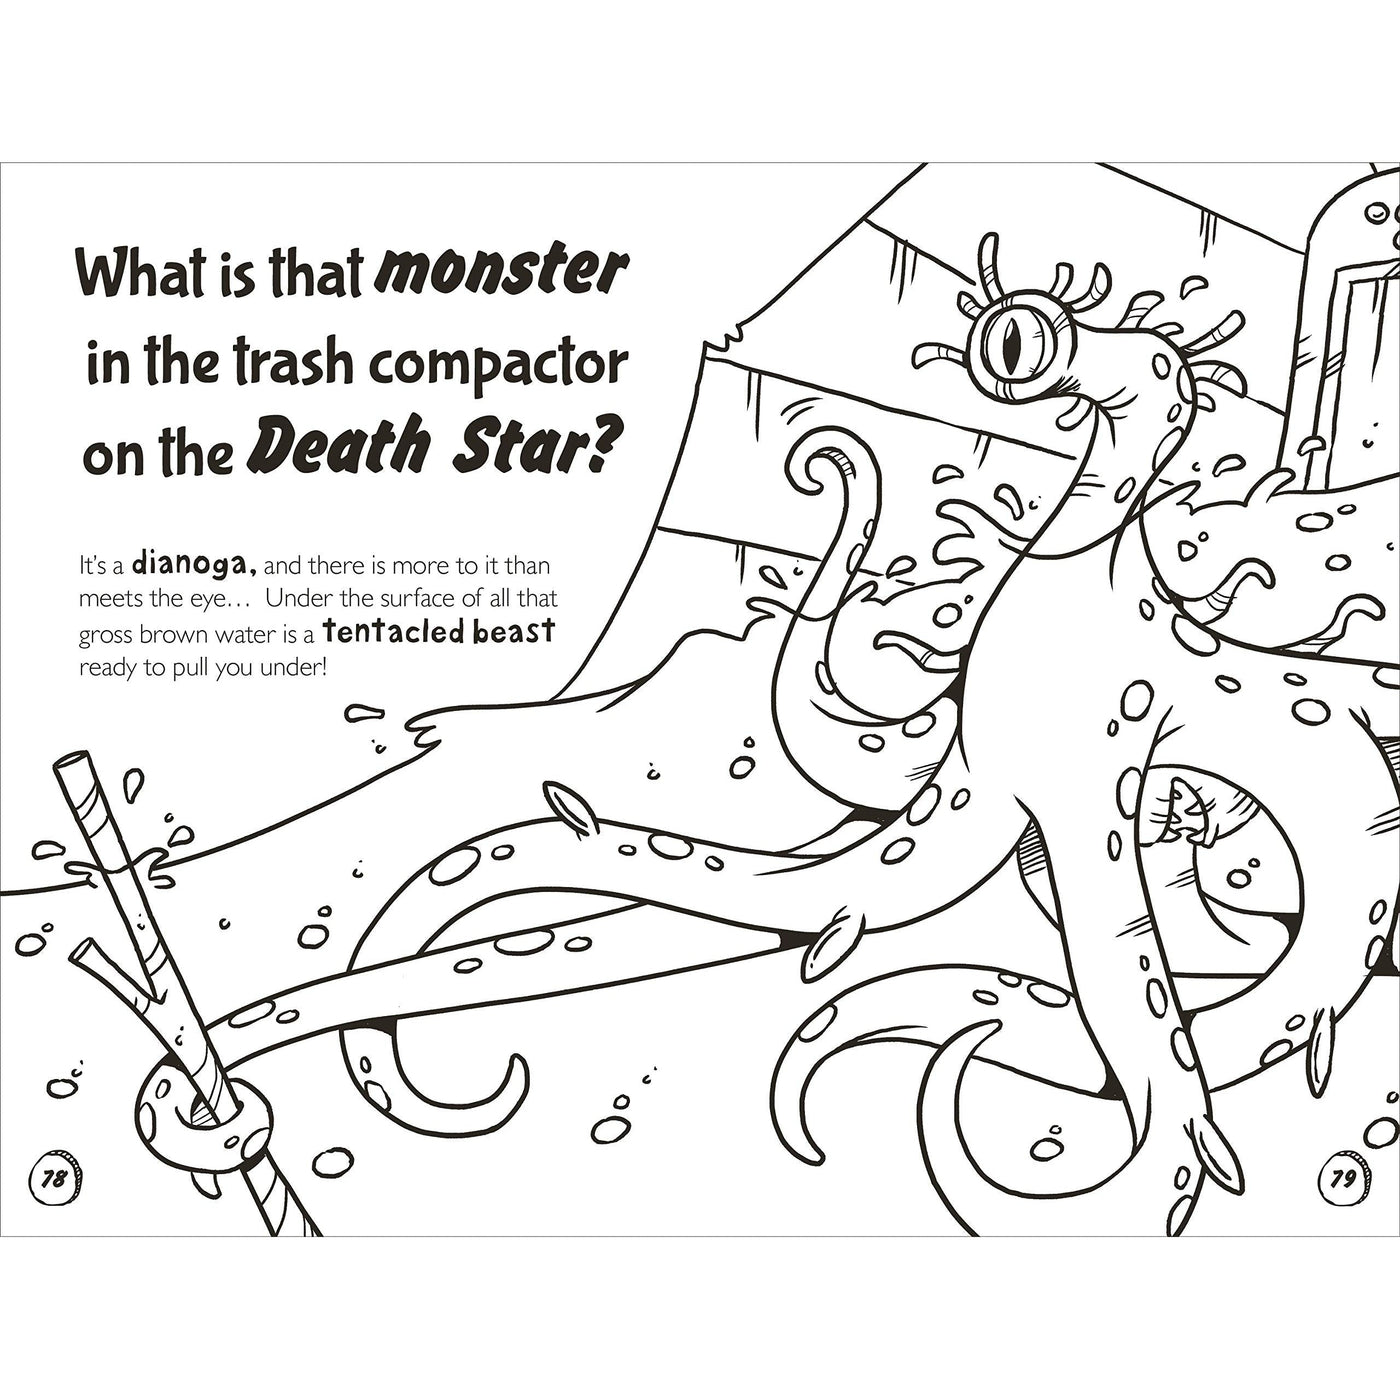 The Star Wars Book of Monsters, Ooze and Slime